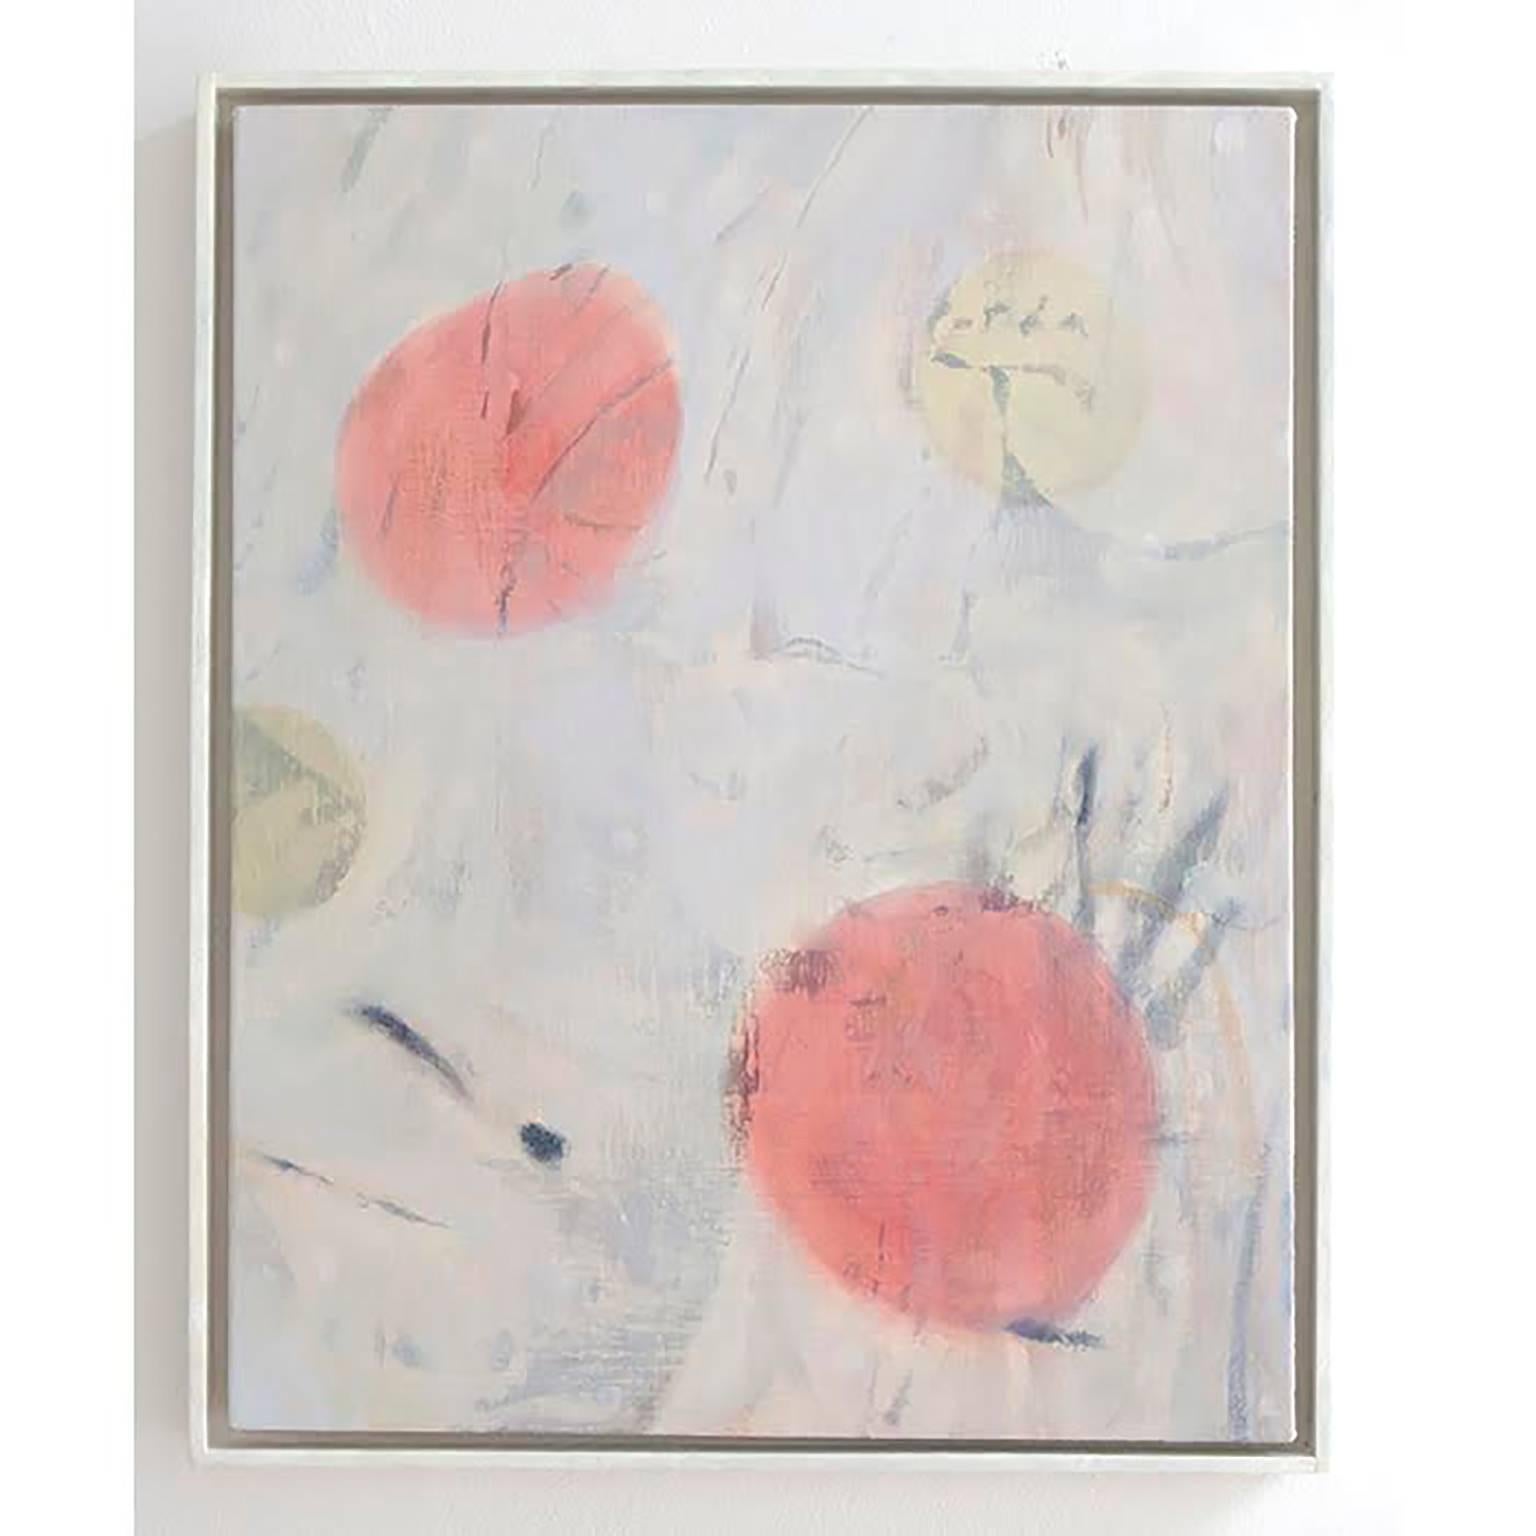 This is a fine art abstract painting by NY based artist Emily Weiner. The contemporary composition features playful circles of red and yellow on a white linen background for both a bold and gentle touch. 